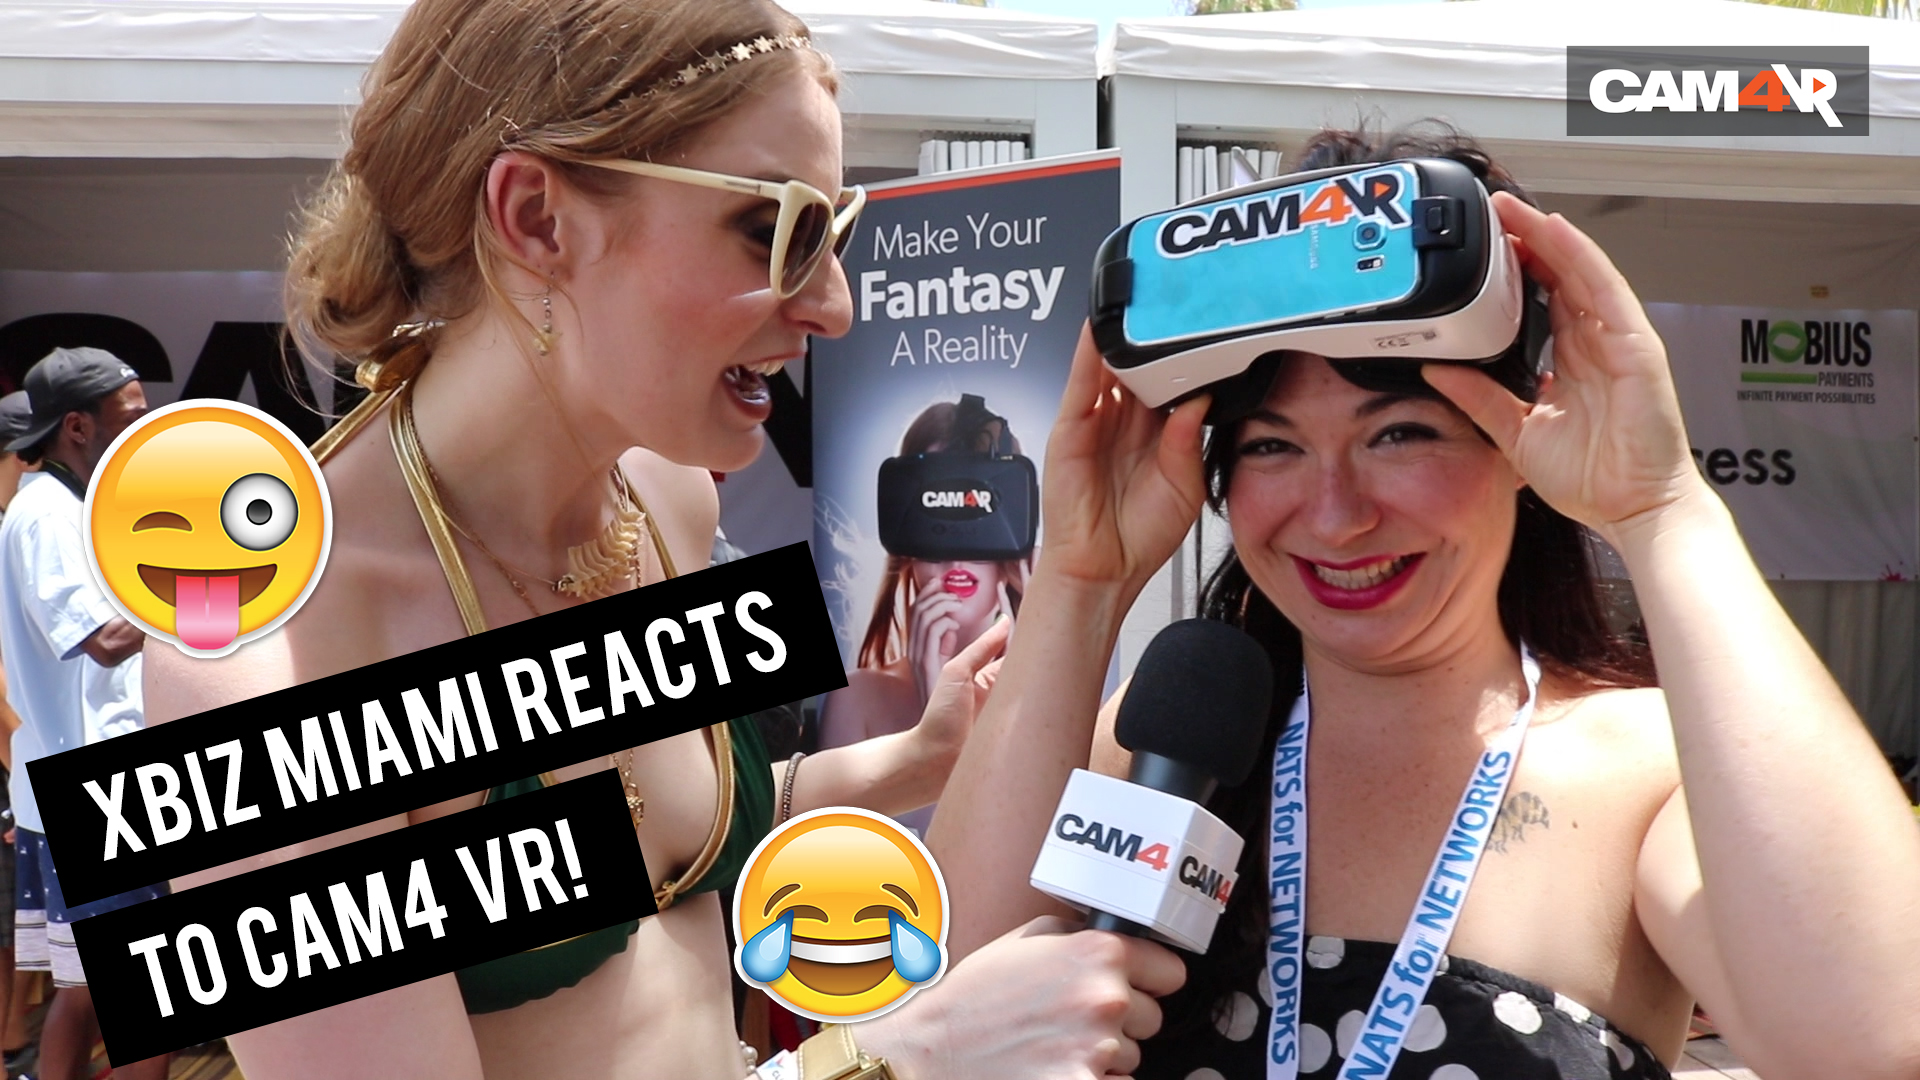 CamCon Reacts to CAM4VR (VIDEO)